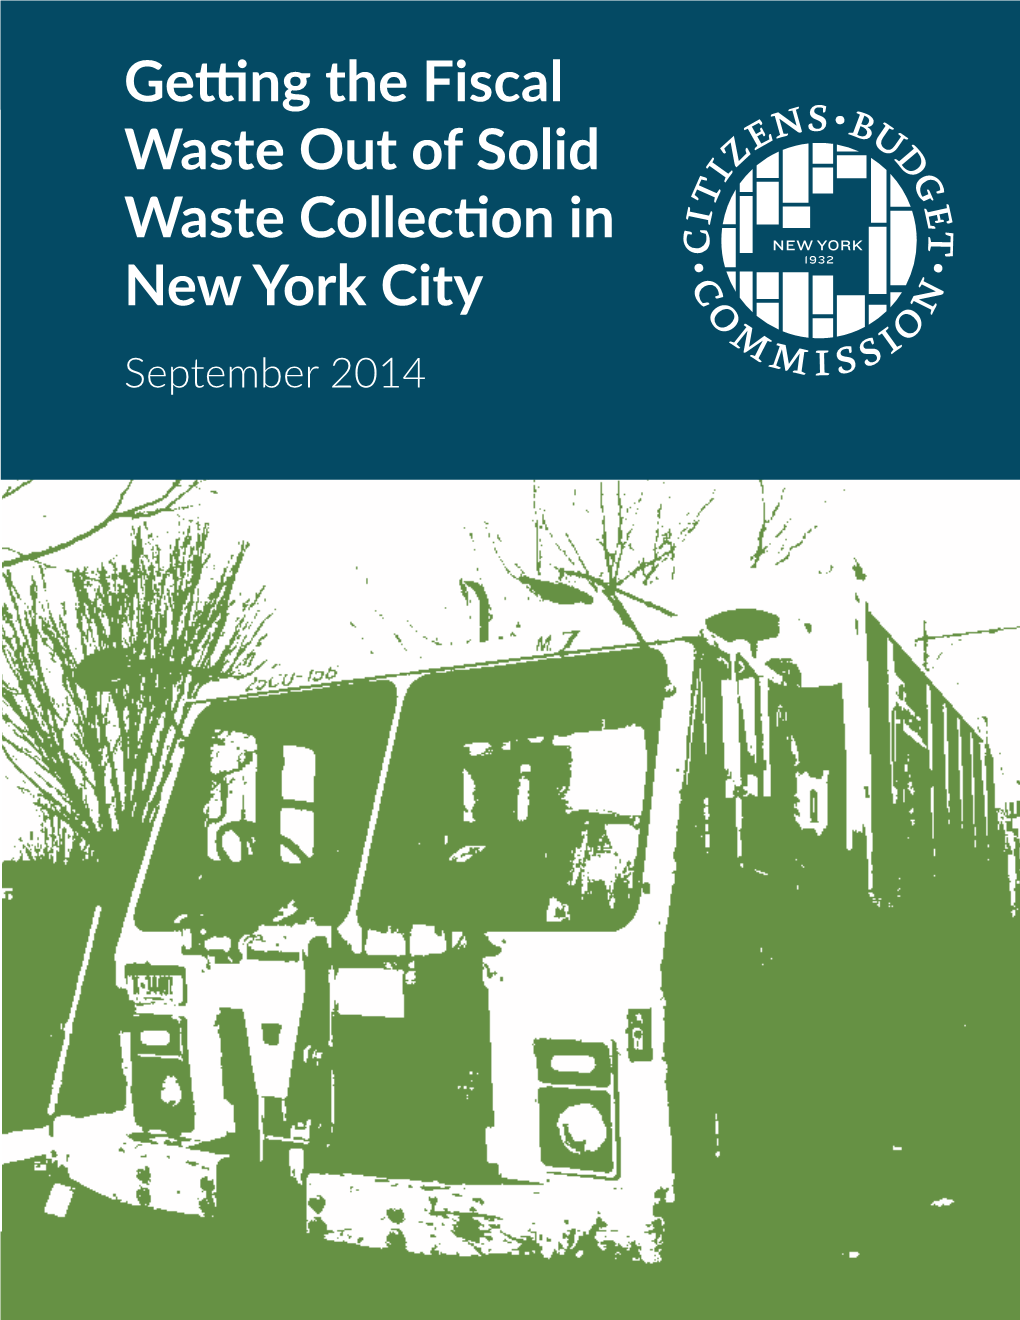 Getting the Fiscal Waste out of Solid Waste Collection in New York City September 2014